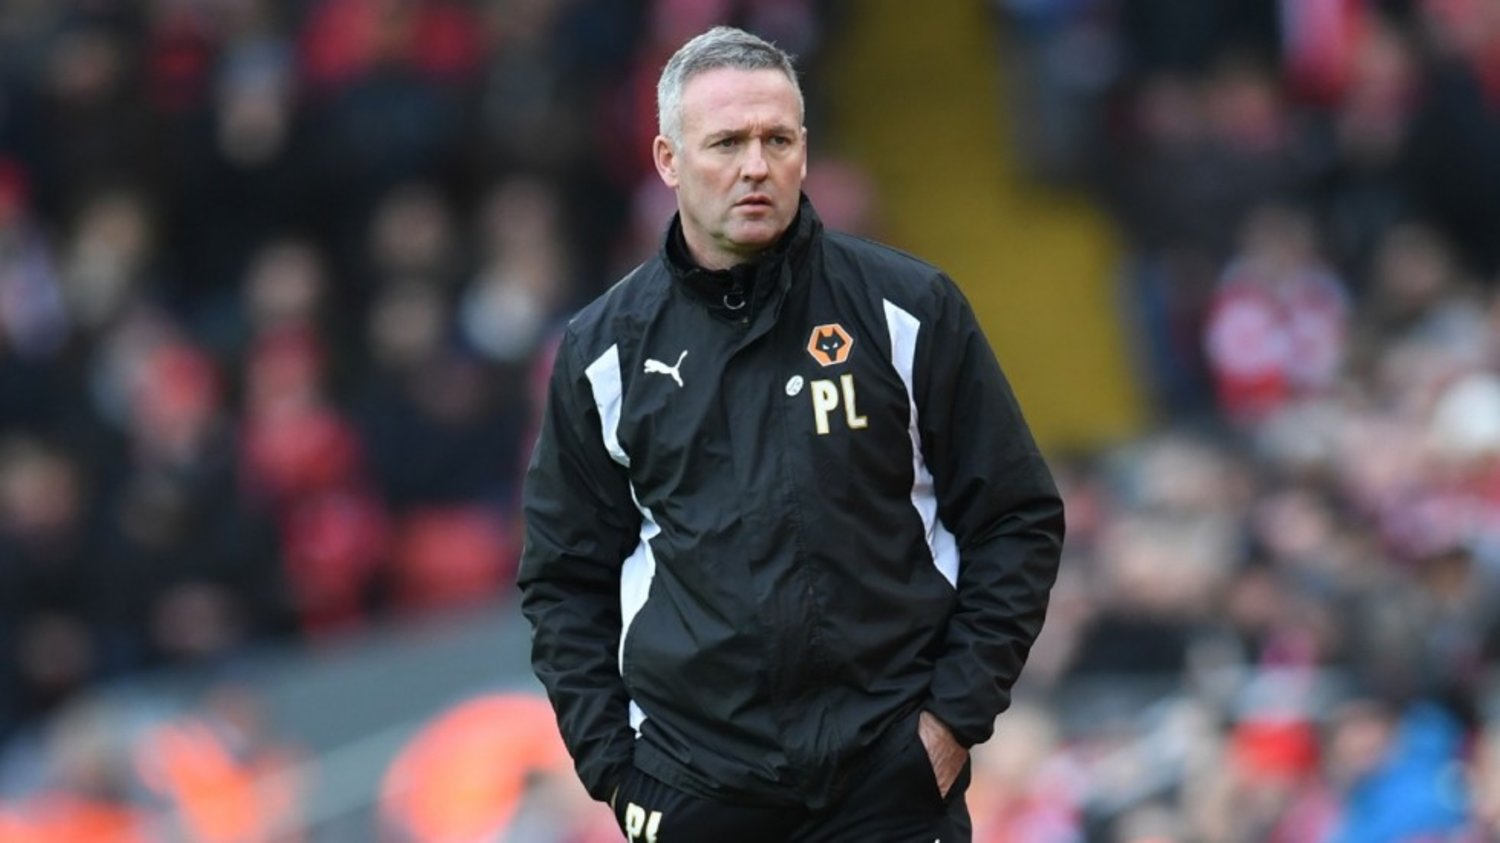 Paul Lambert on the touchline as Wolverhampton Wanderers manager in January 2017. (AFP)